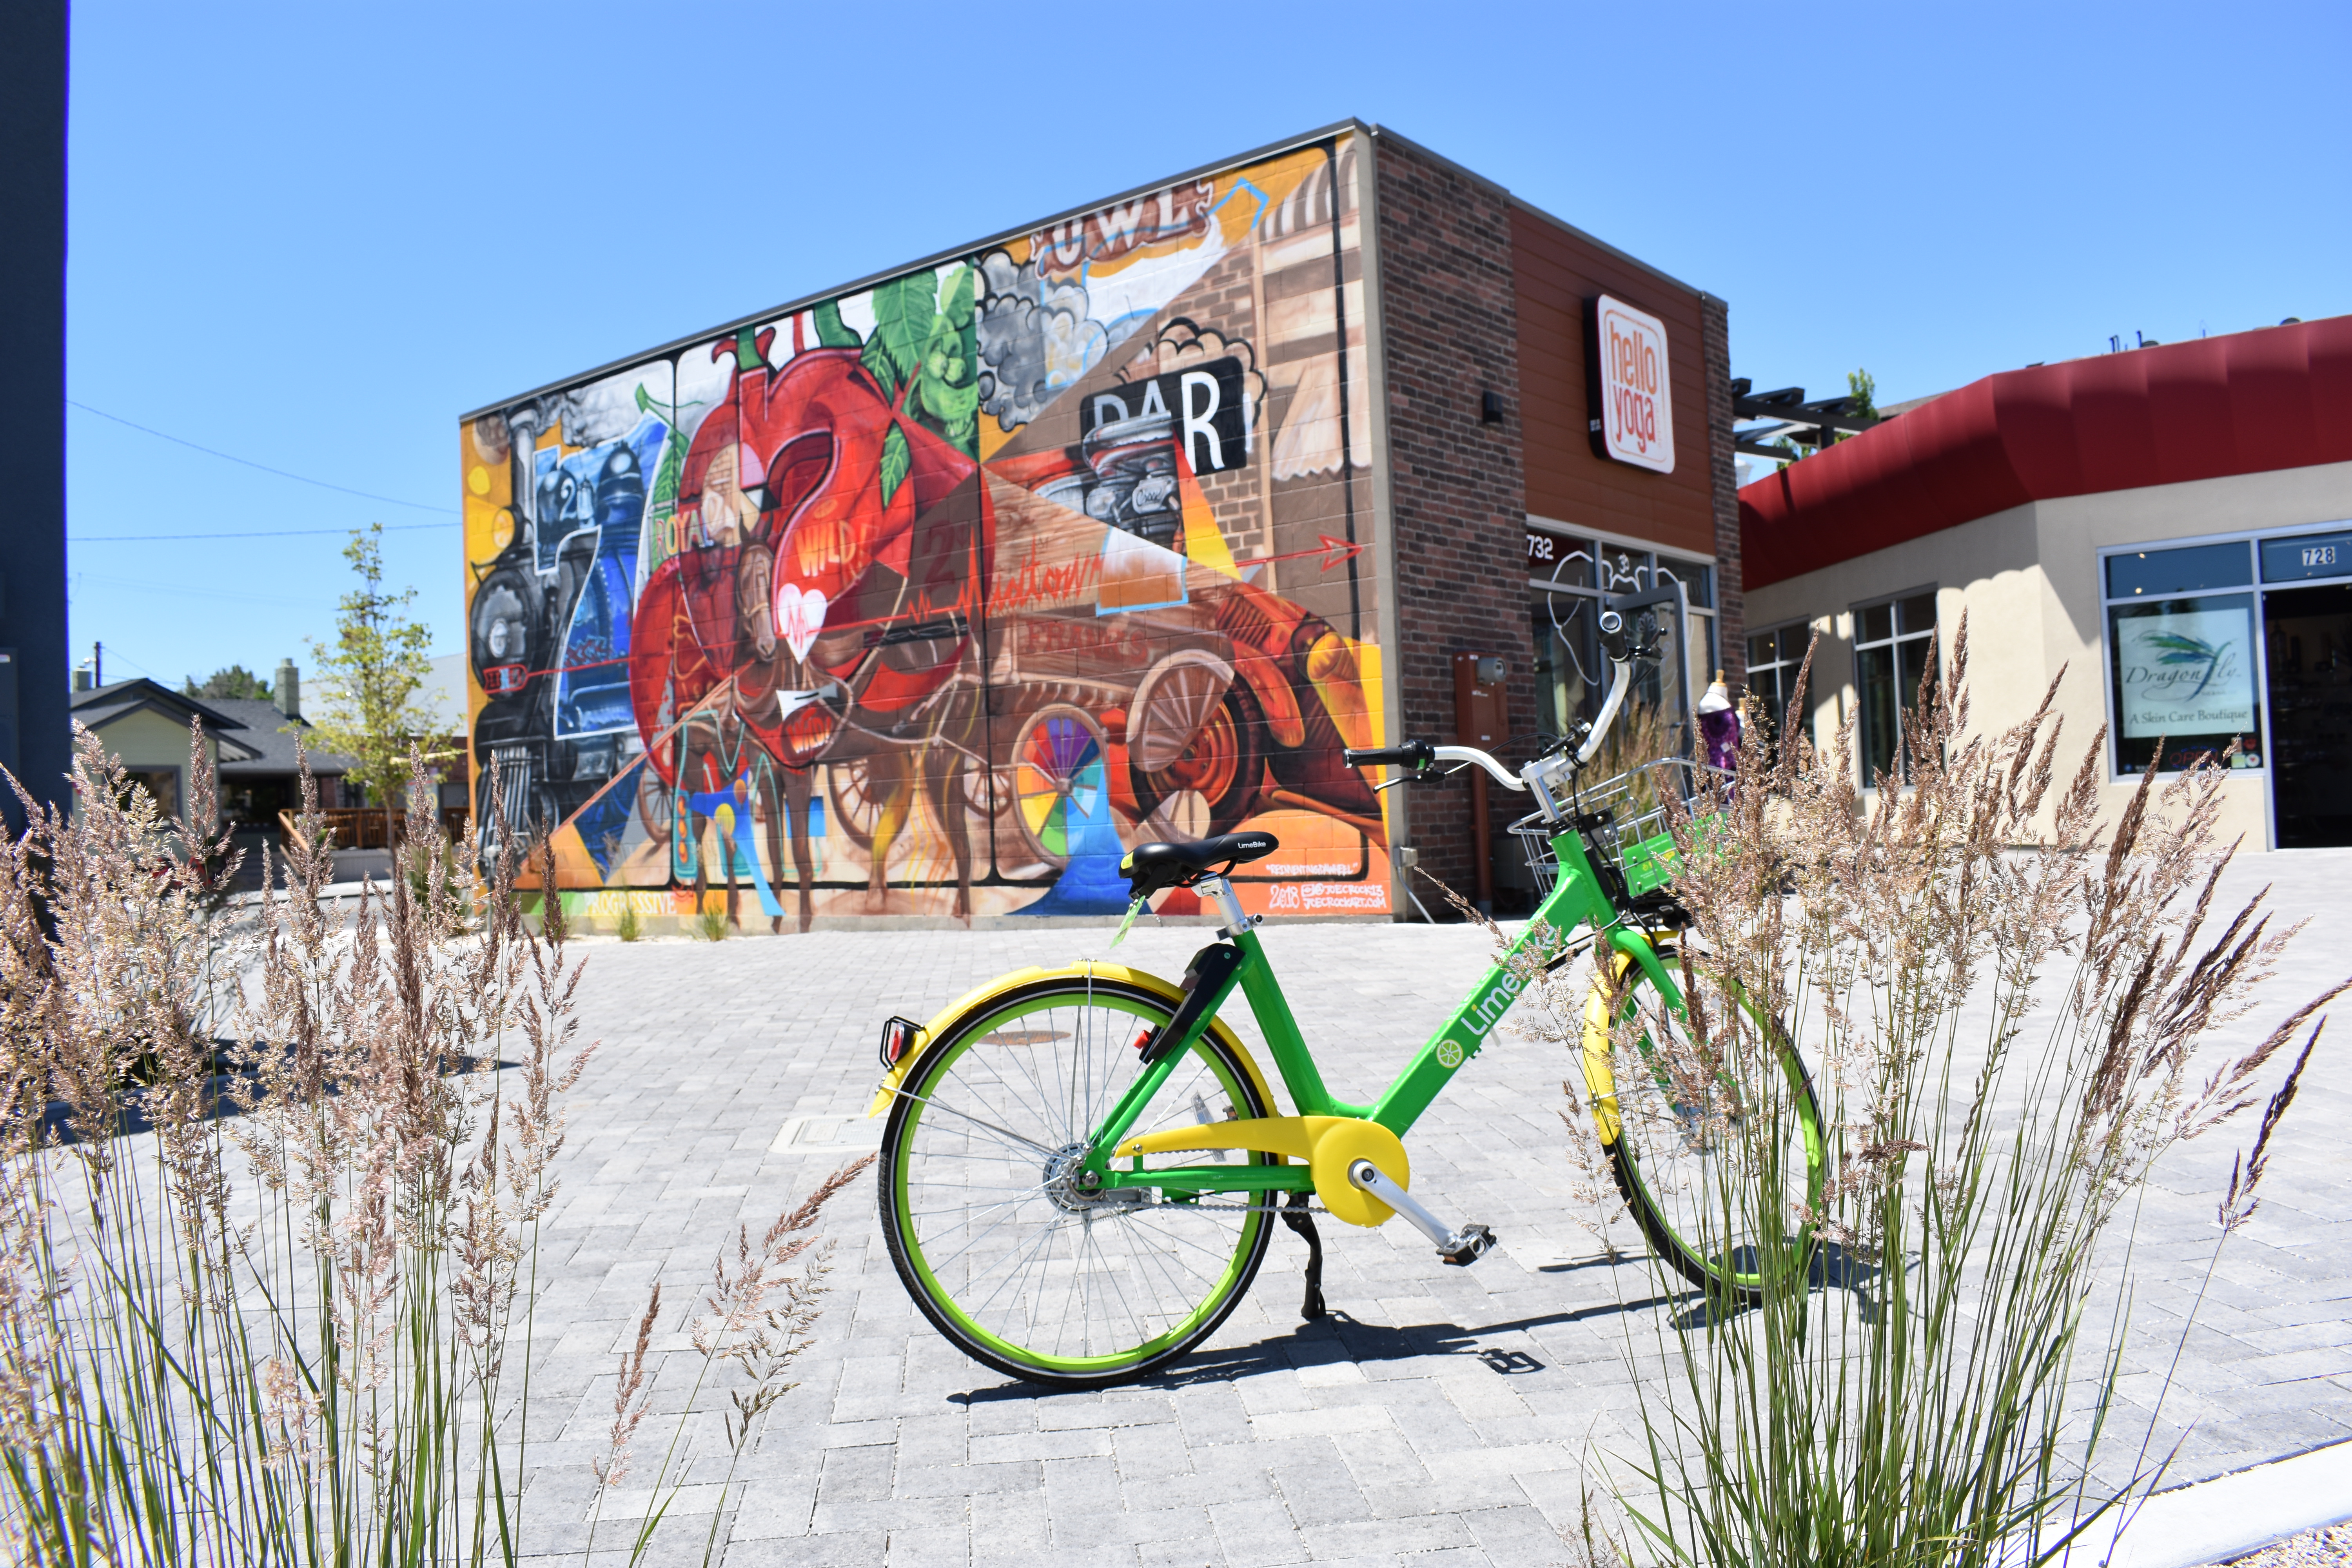 LimeBike’s green and yellow bikes are sprinkled throughout Reno. In such a compact city, it’s an easy way to get around town.